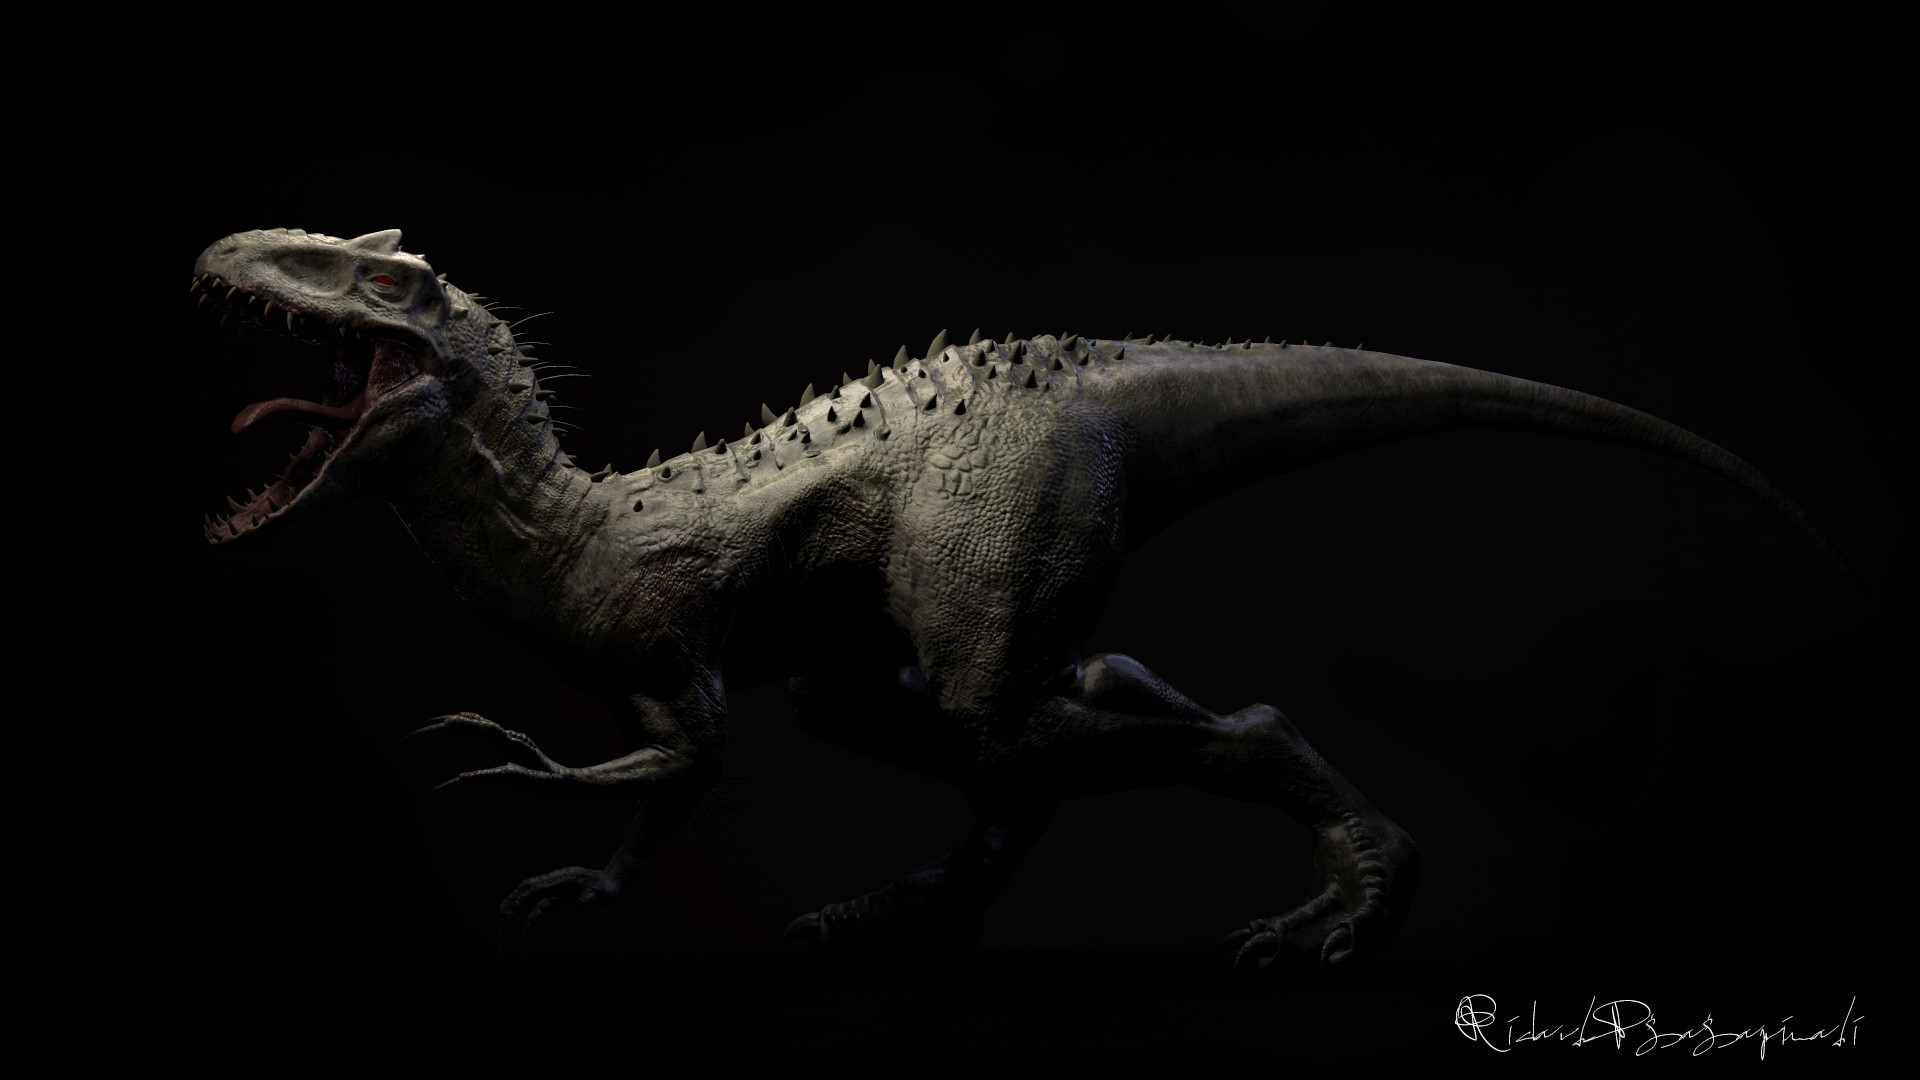 Indominus Rex Wallpaper - Wall.GiftWatches.CO